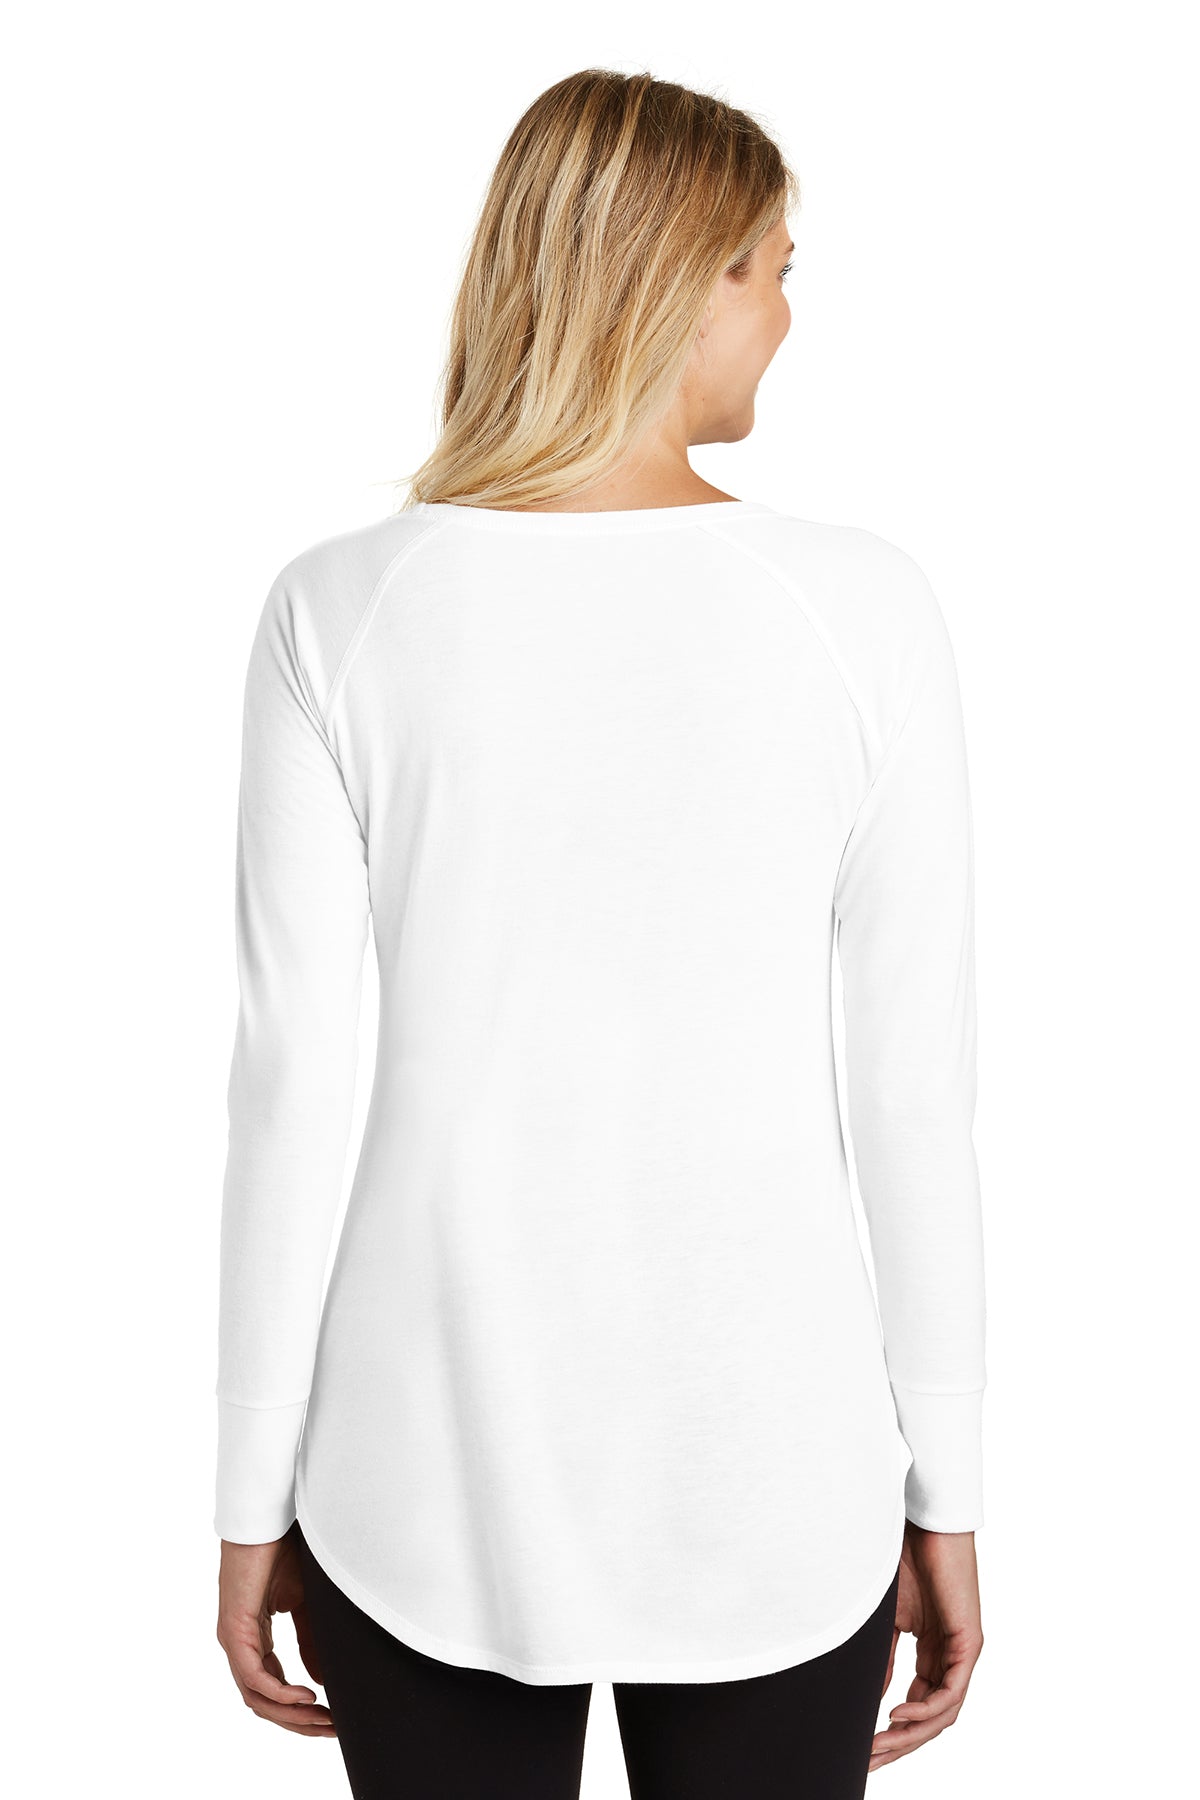 District Made Ladies Perfect Tri Long Sleeves, White